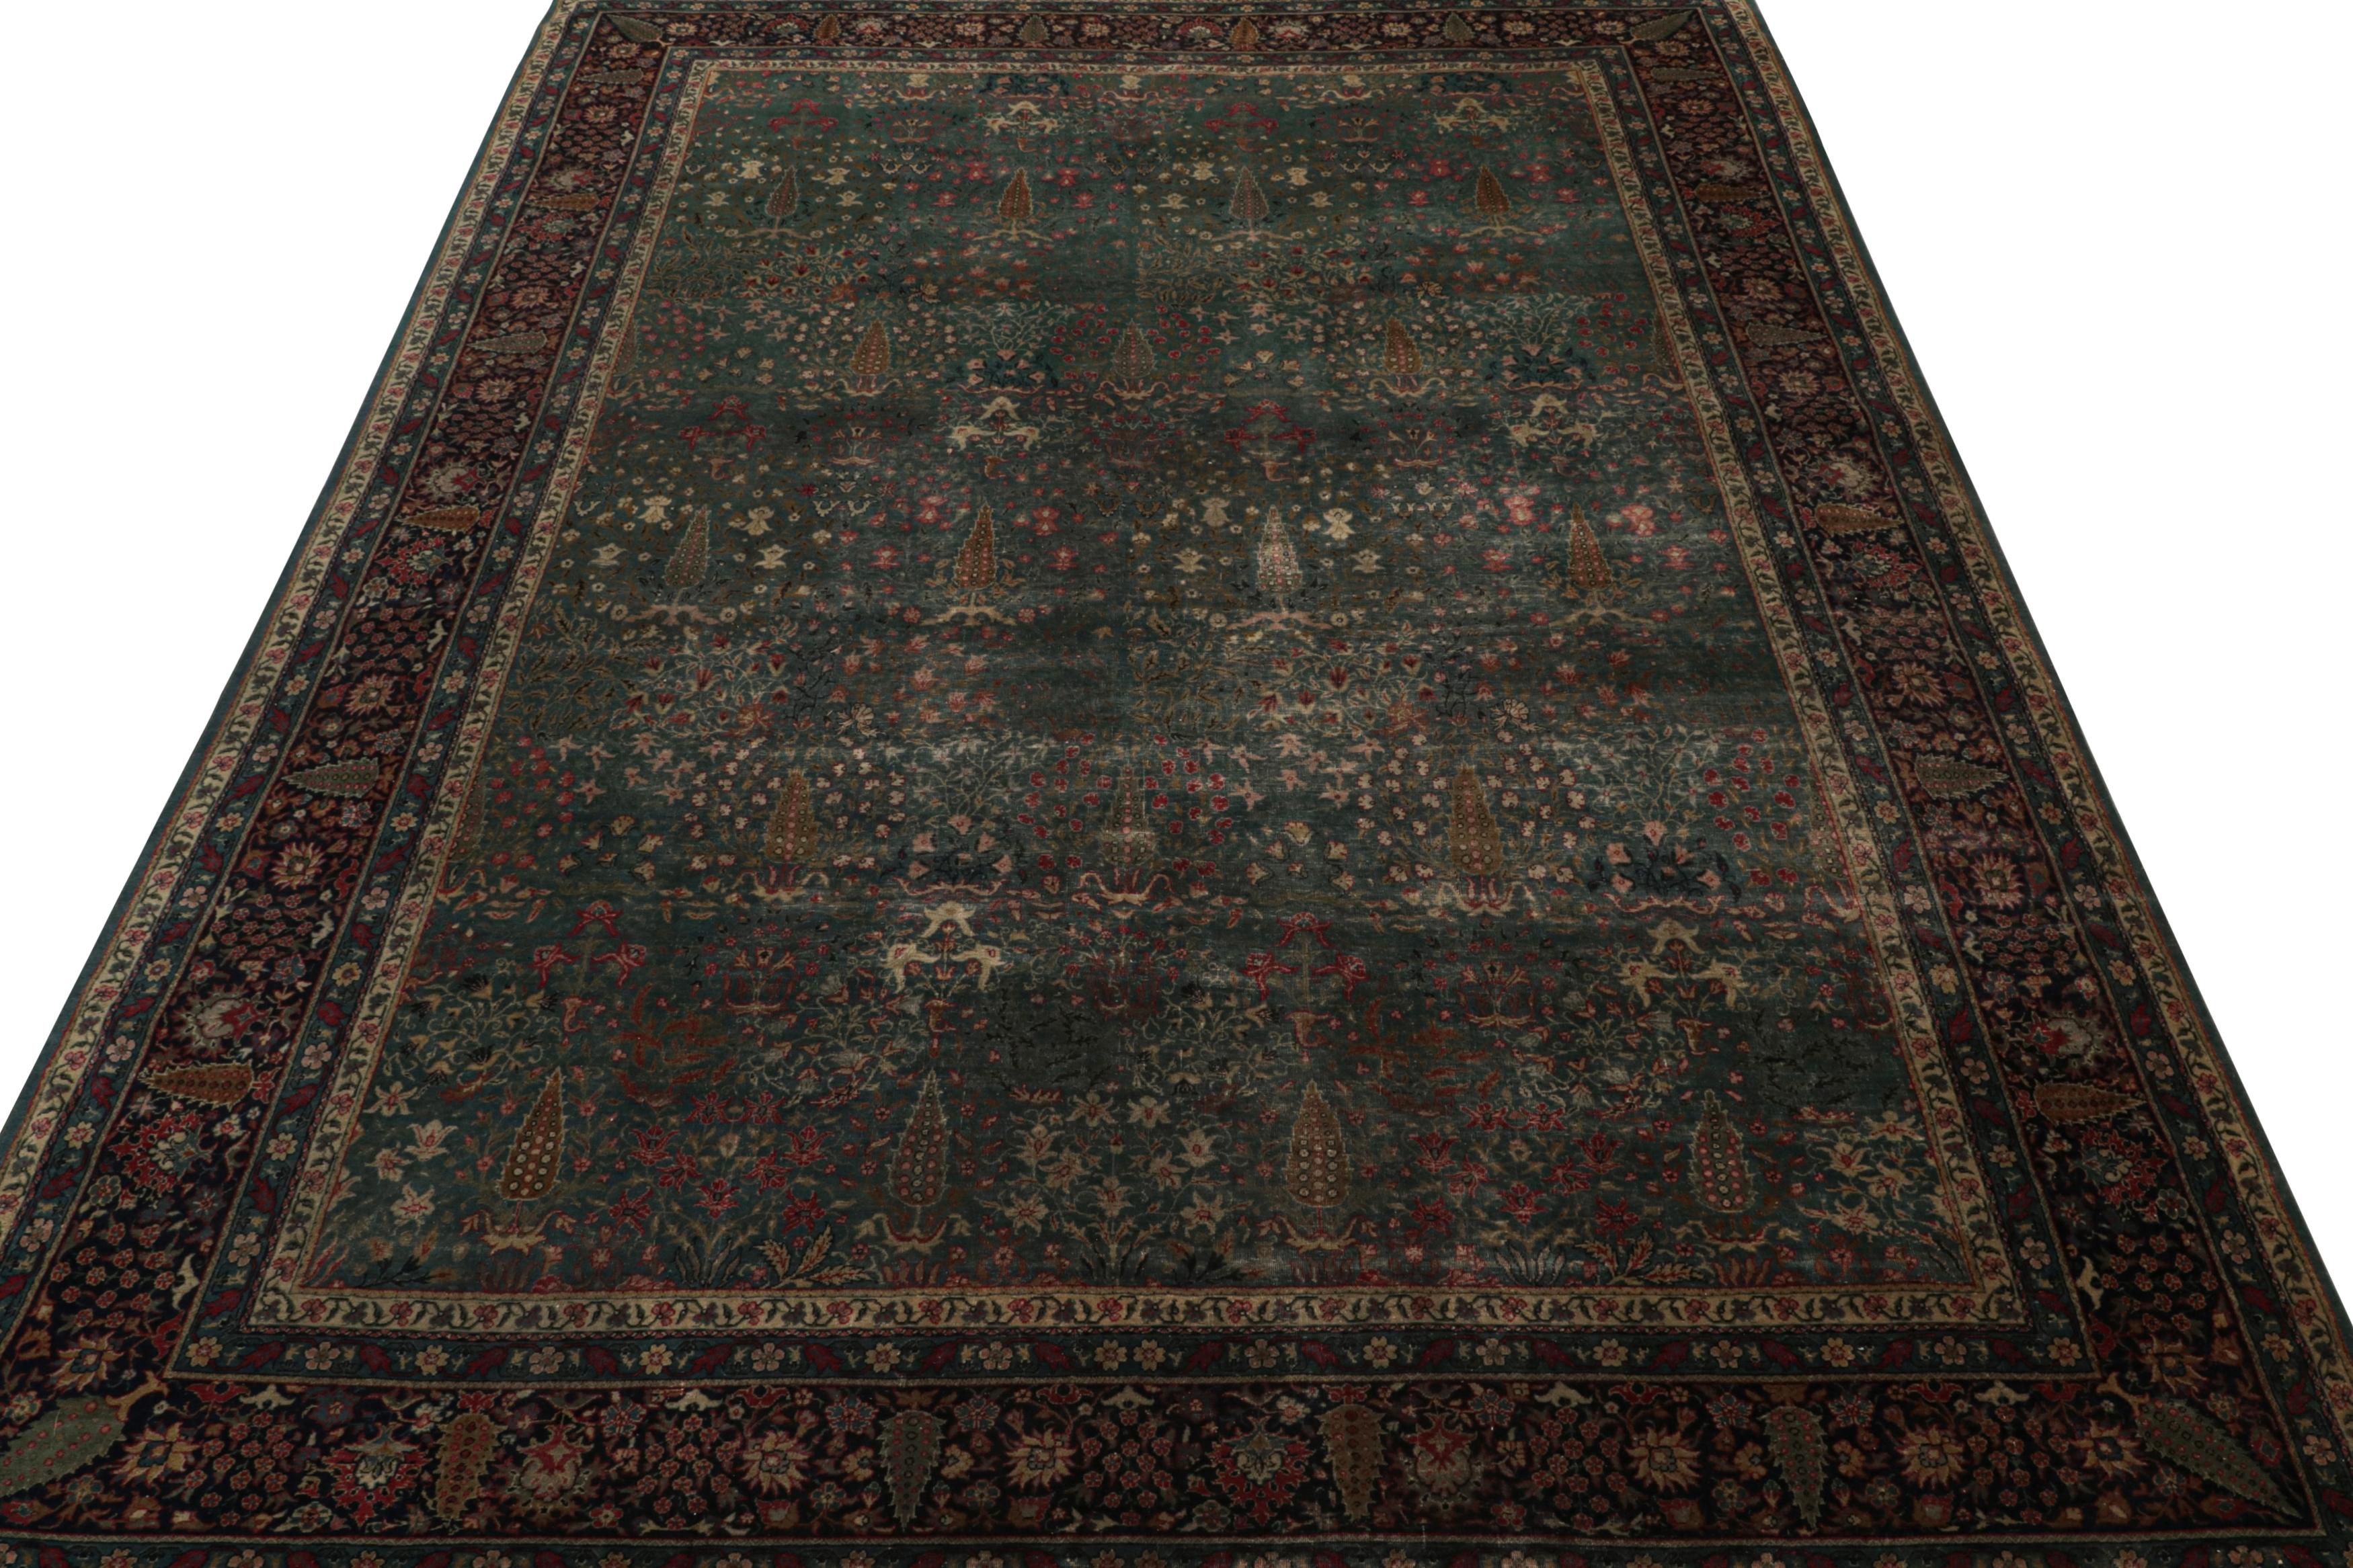 Turkish Antique Sivas Rug in Teal, with Floral Patterns, from Rug & Kilim For Sale